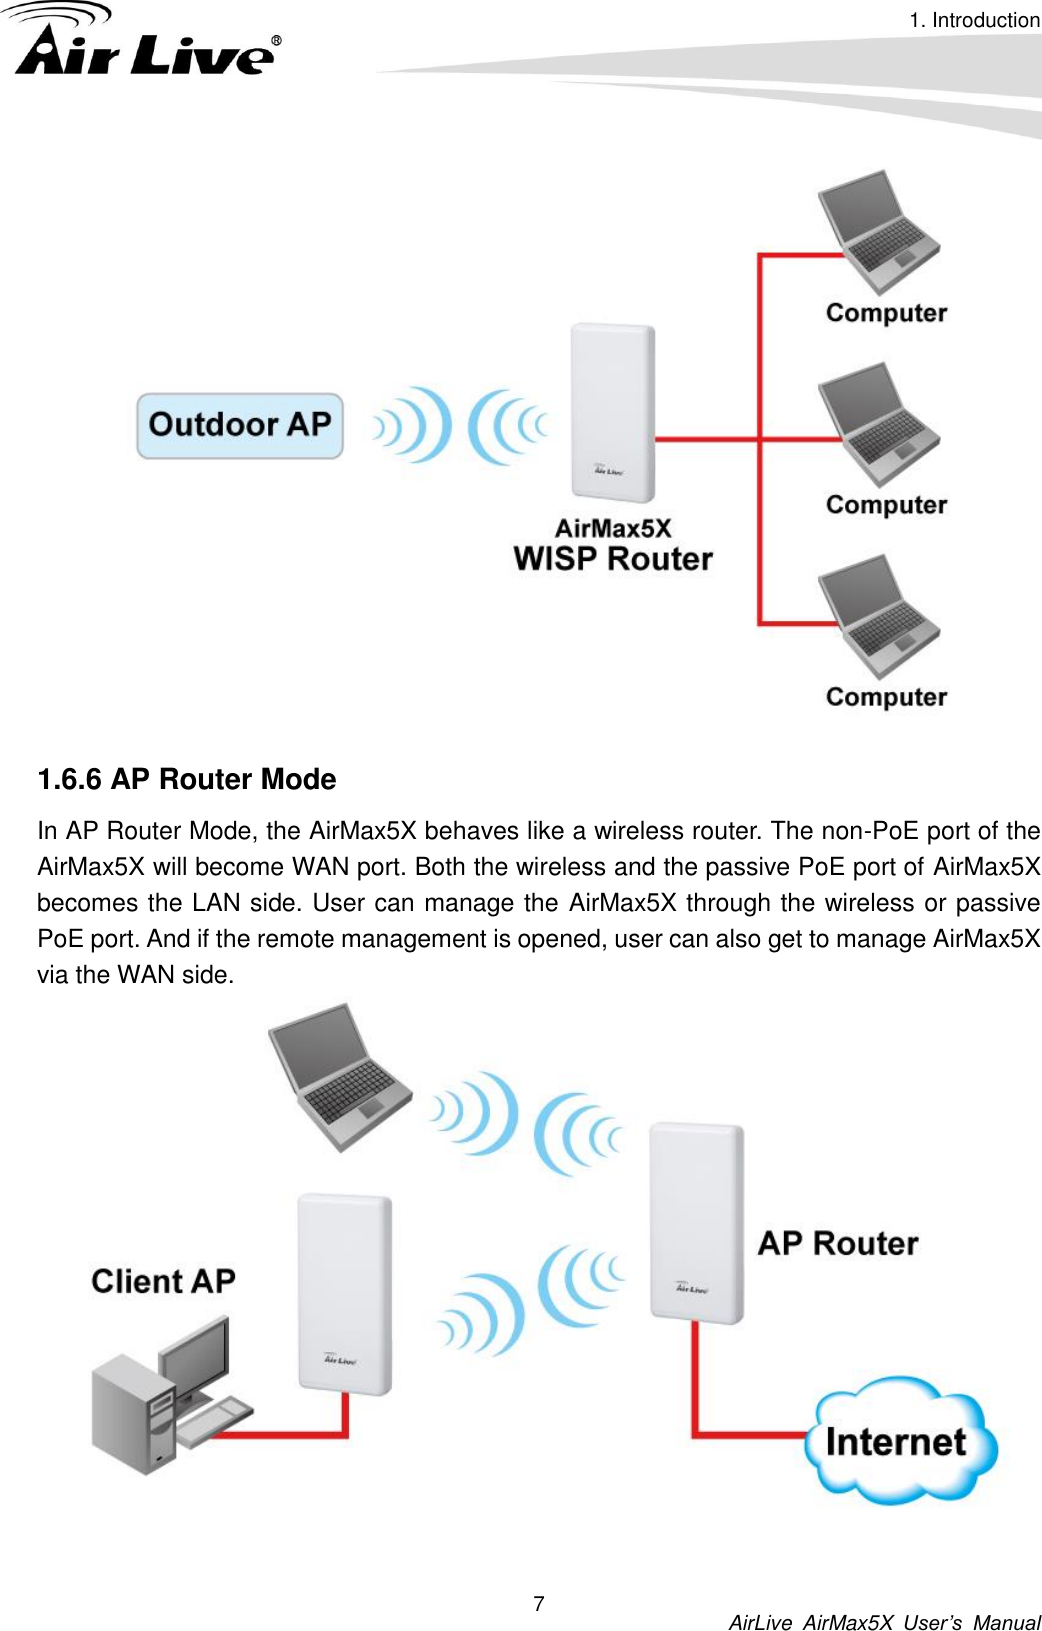 1. Introduction          AirLive  AirMax5X  User’s  Manual 7   1.6.6 AP Router Mode In AP Router Mode, the AirMax5X behaves like a wireless router. The non-PoE port of the AirMax5X will become WAN port. Both the wireless and the passive PoE port of AirMax5X becomes the LAN side. User can manage the AirMax5X through the wireless or passive PoE port. And if the remote management is opened, user can also get to manage AirMax5X via the WAN side.   